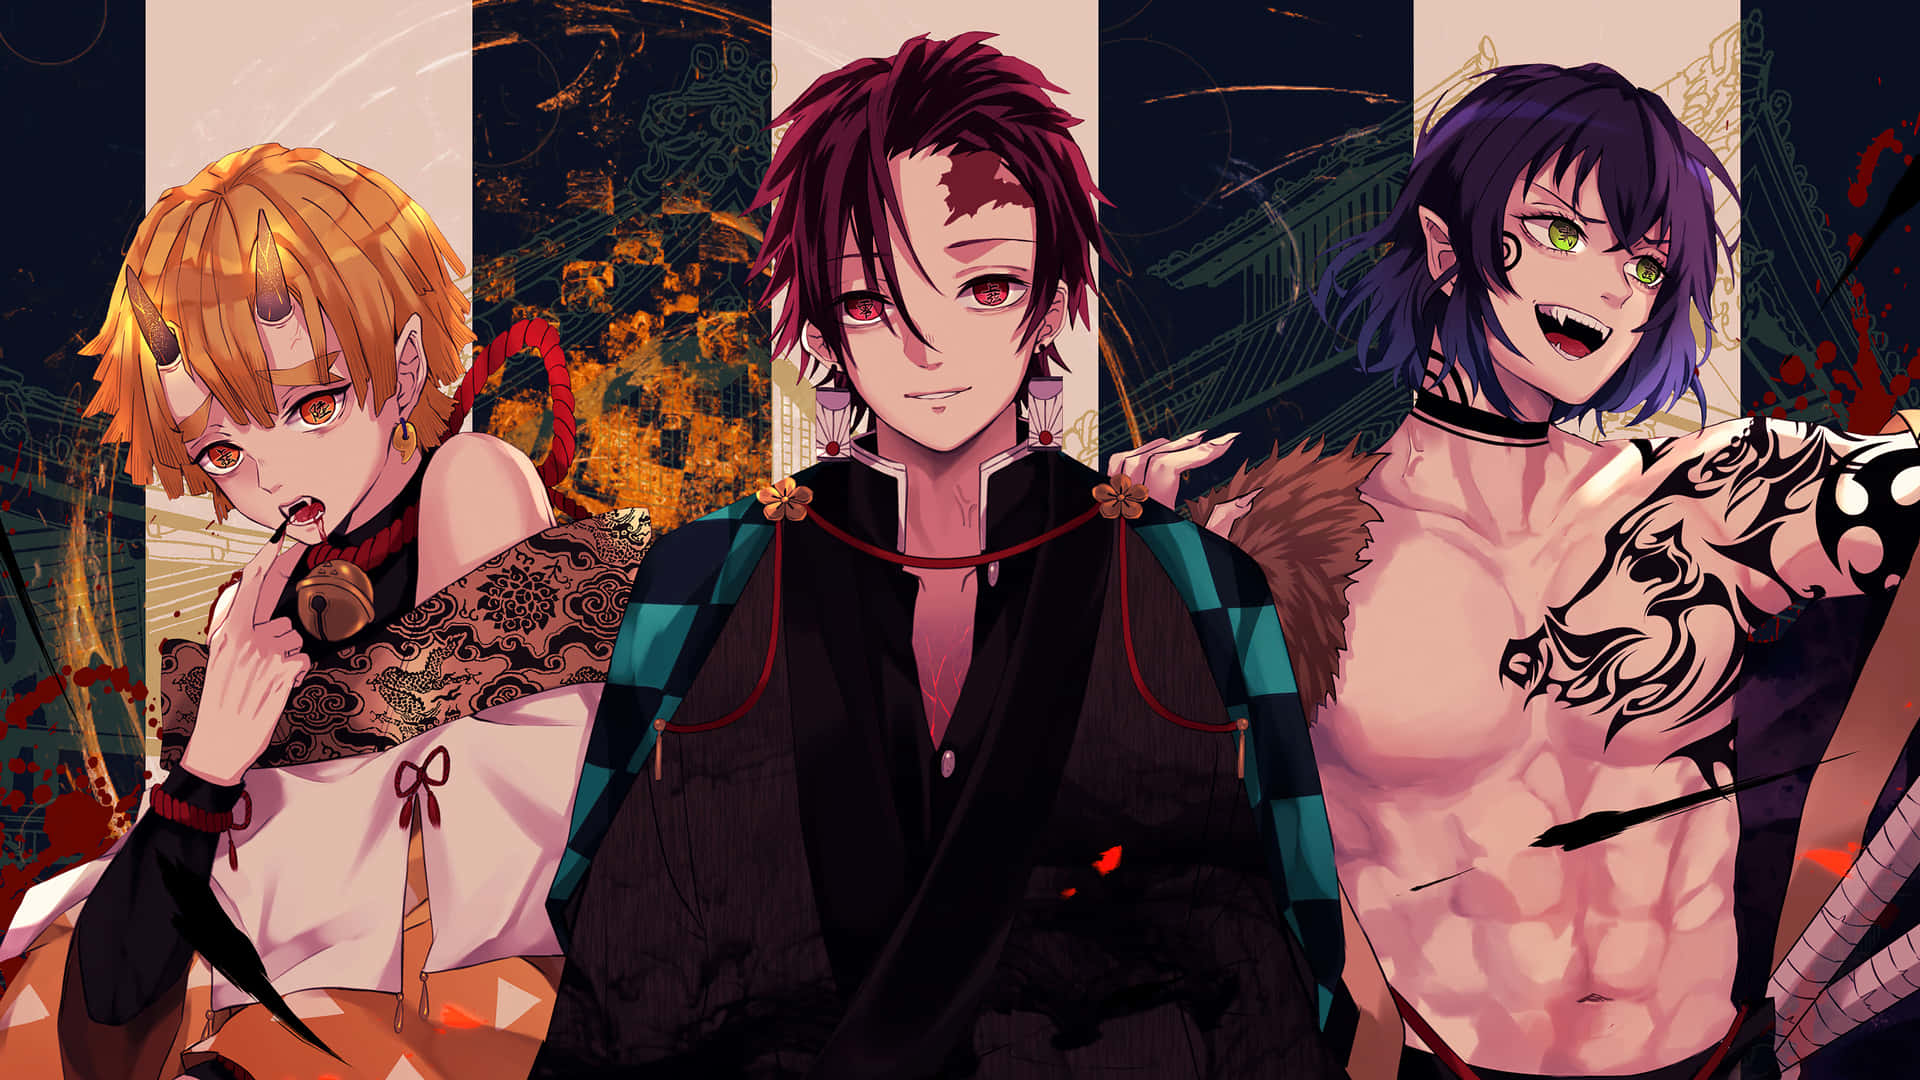 Join the Demon Slayer Group and Fight for Justice! Wallpaper